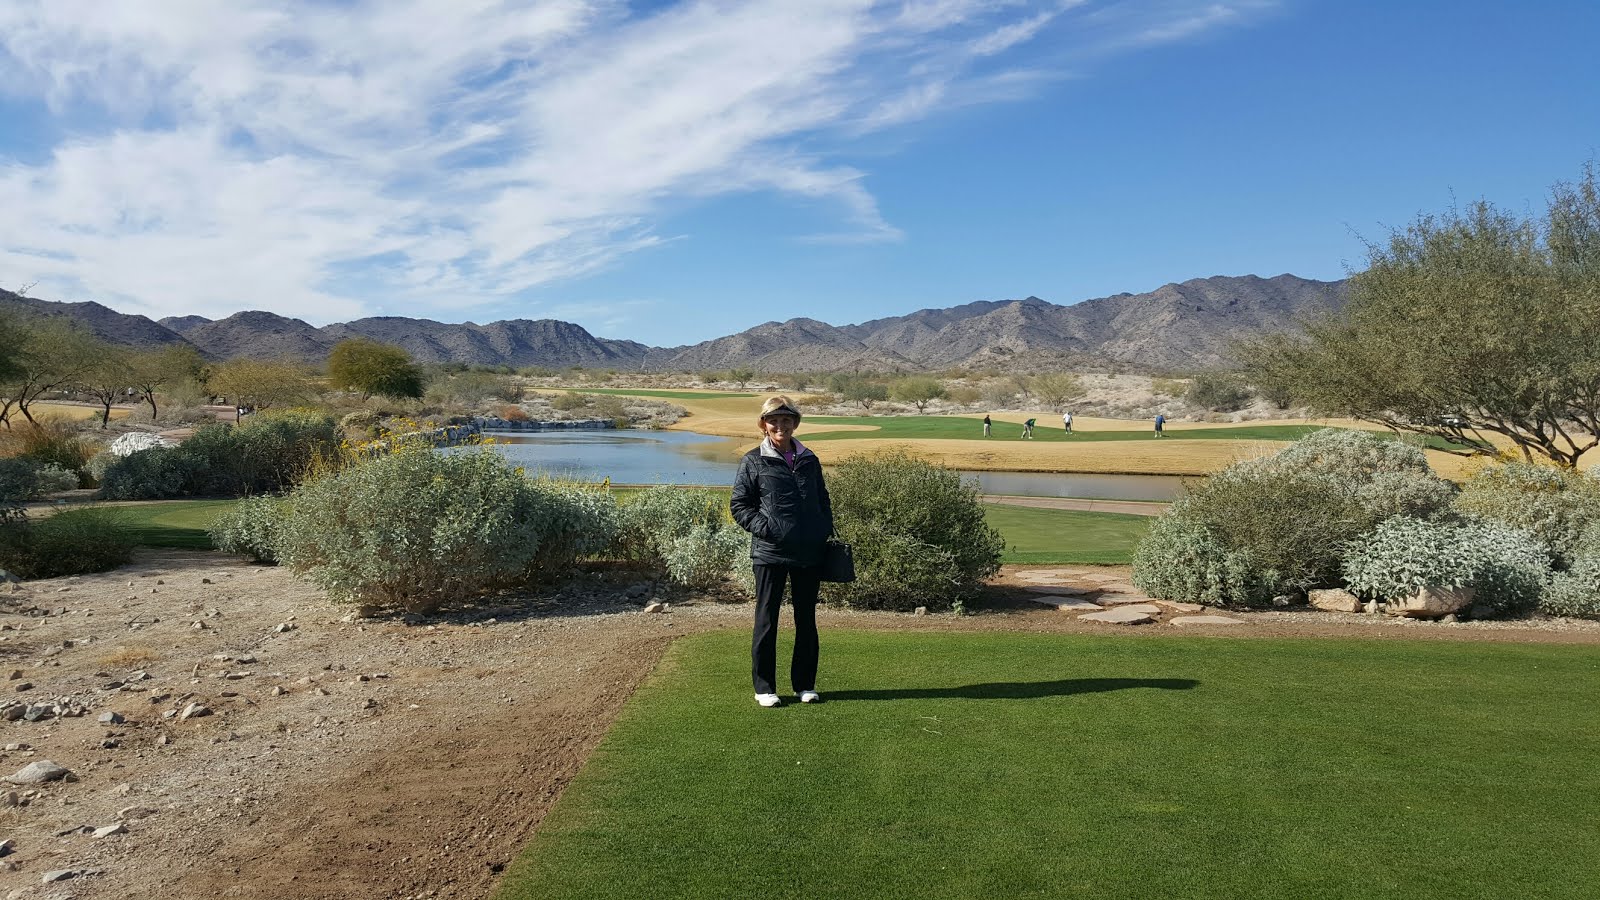 Great Way to Spend the Last Day of 2015. Verrado Golf Club in the White Tank Mountains